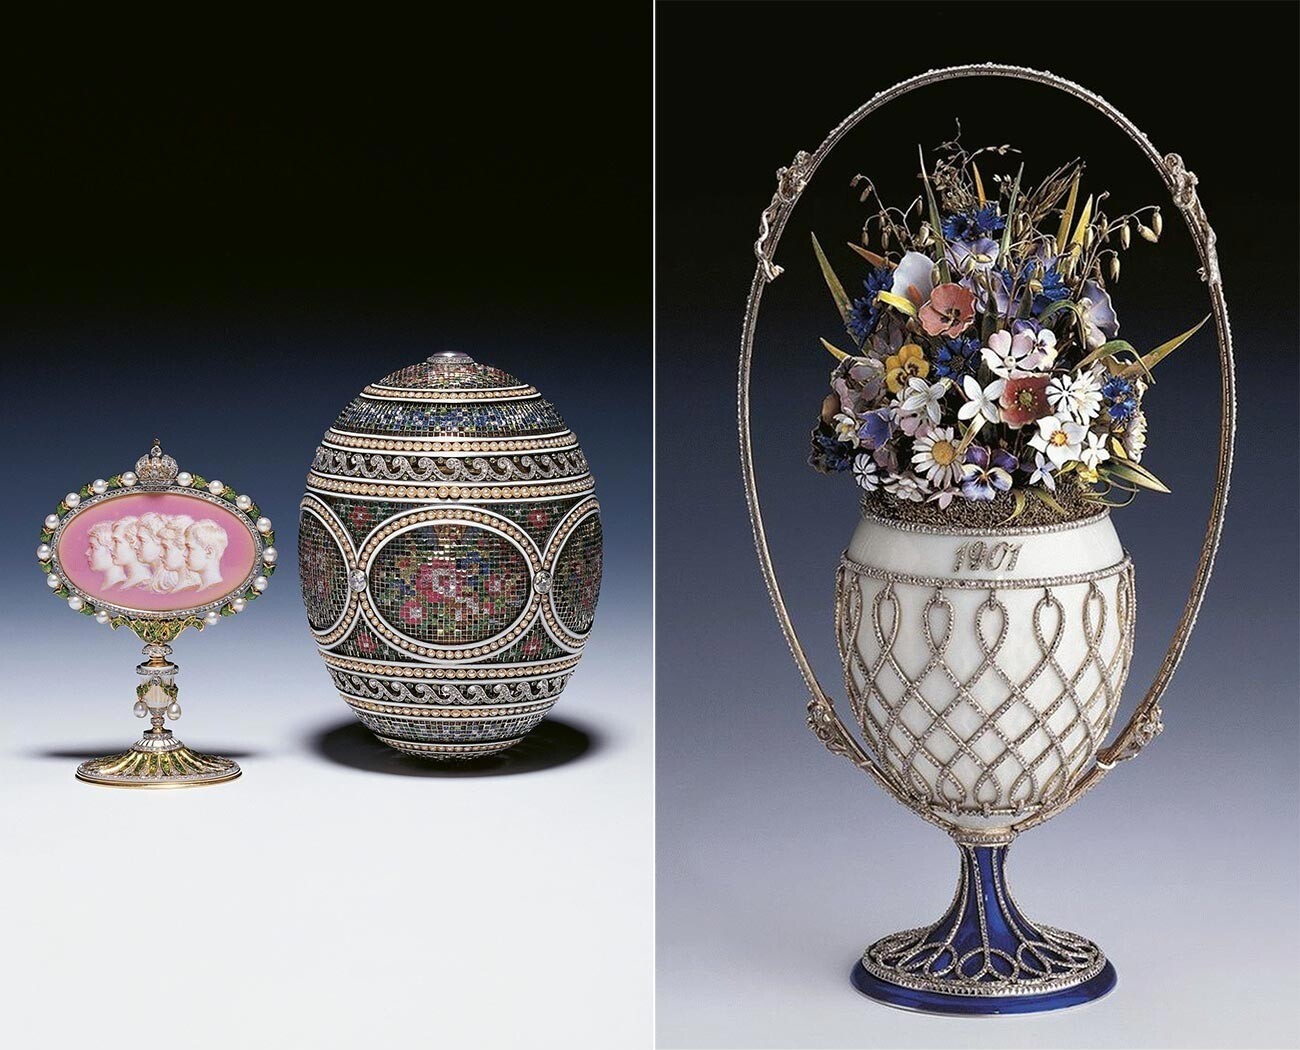 ‘Mosaic’ and ‘Basket of wildflowers’ Faberge eggs, sold in the 1930s to the British royal family